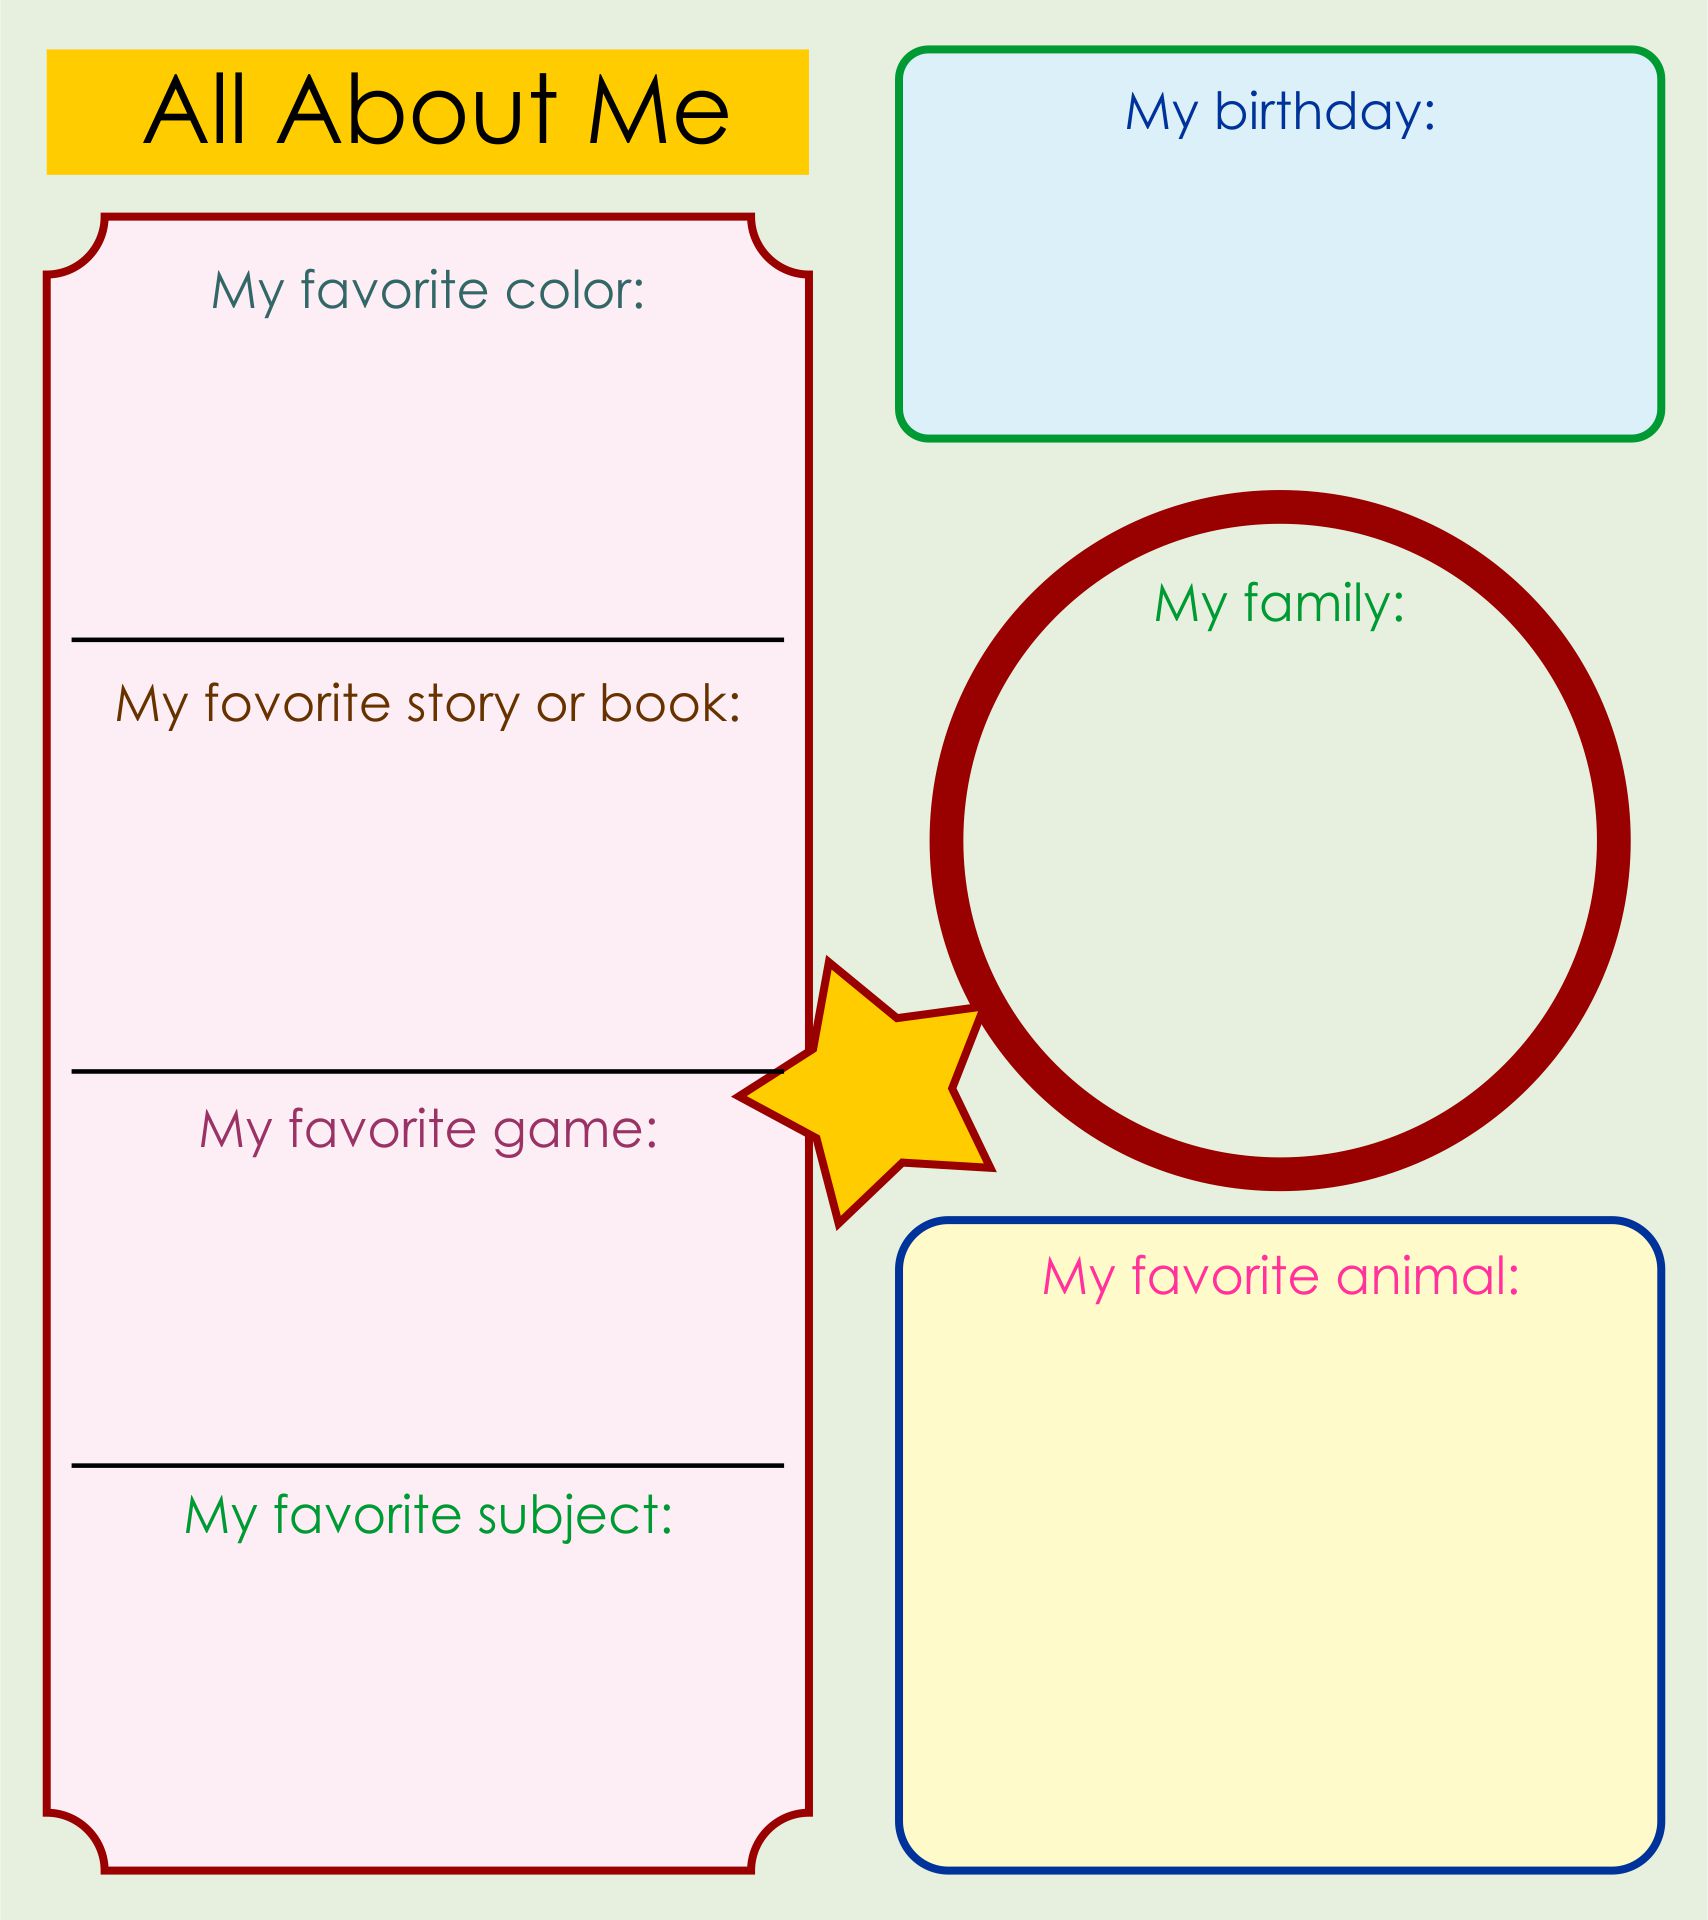 All About Me Worksheet Free Printable